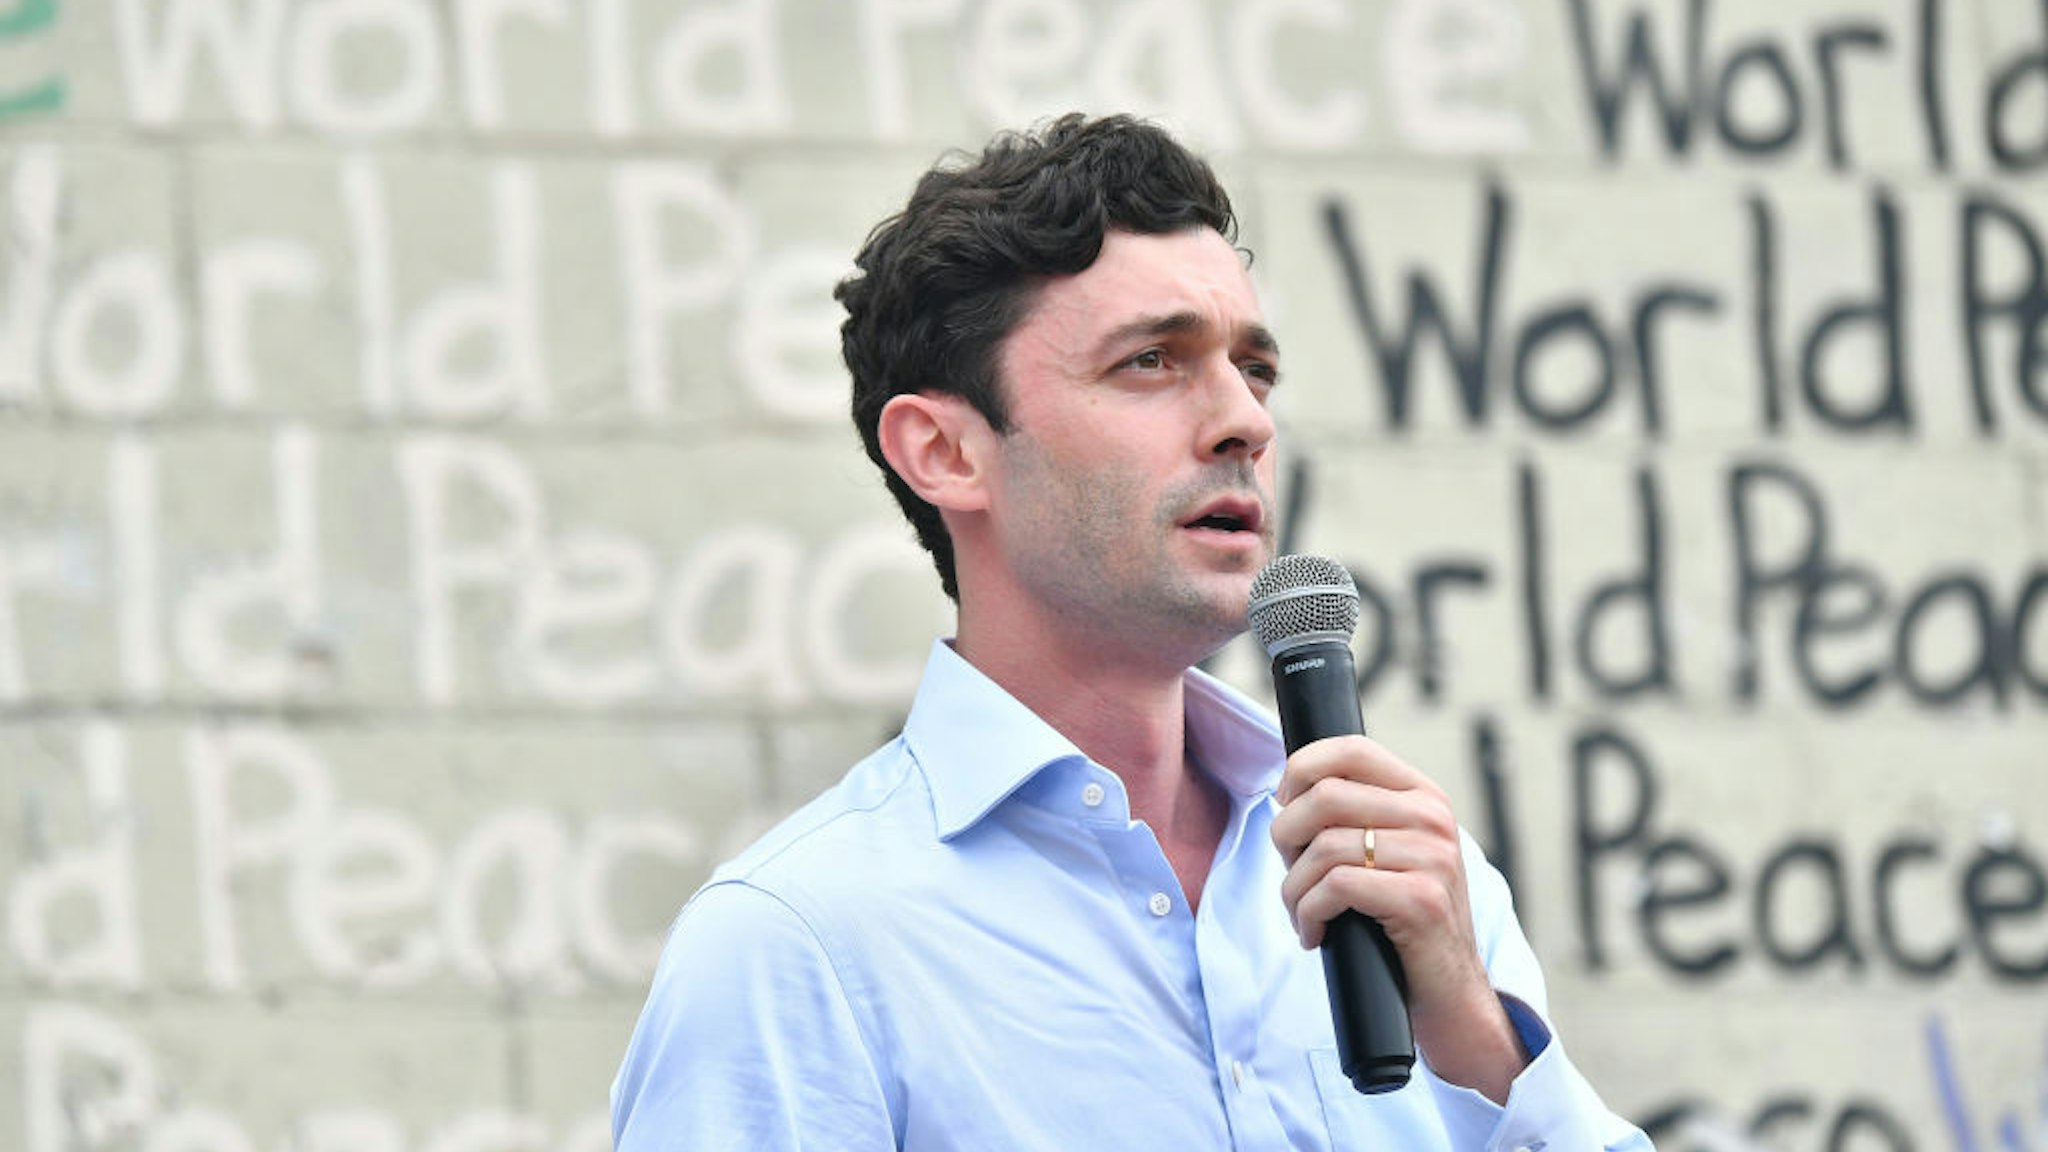 ATLANTA, GEORGIA - JUNE 19: US Senate candidate Jon Ossoff speaks onstage during Juneteenth Voter Registration Concert &amp; Rally at Murphy Park Fairgrounds on June 19, 2020 in Atlanta, Georgia. (Photo by Paras Griffin/Getty Images,)